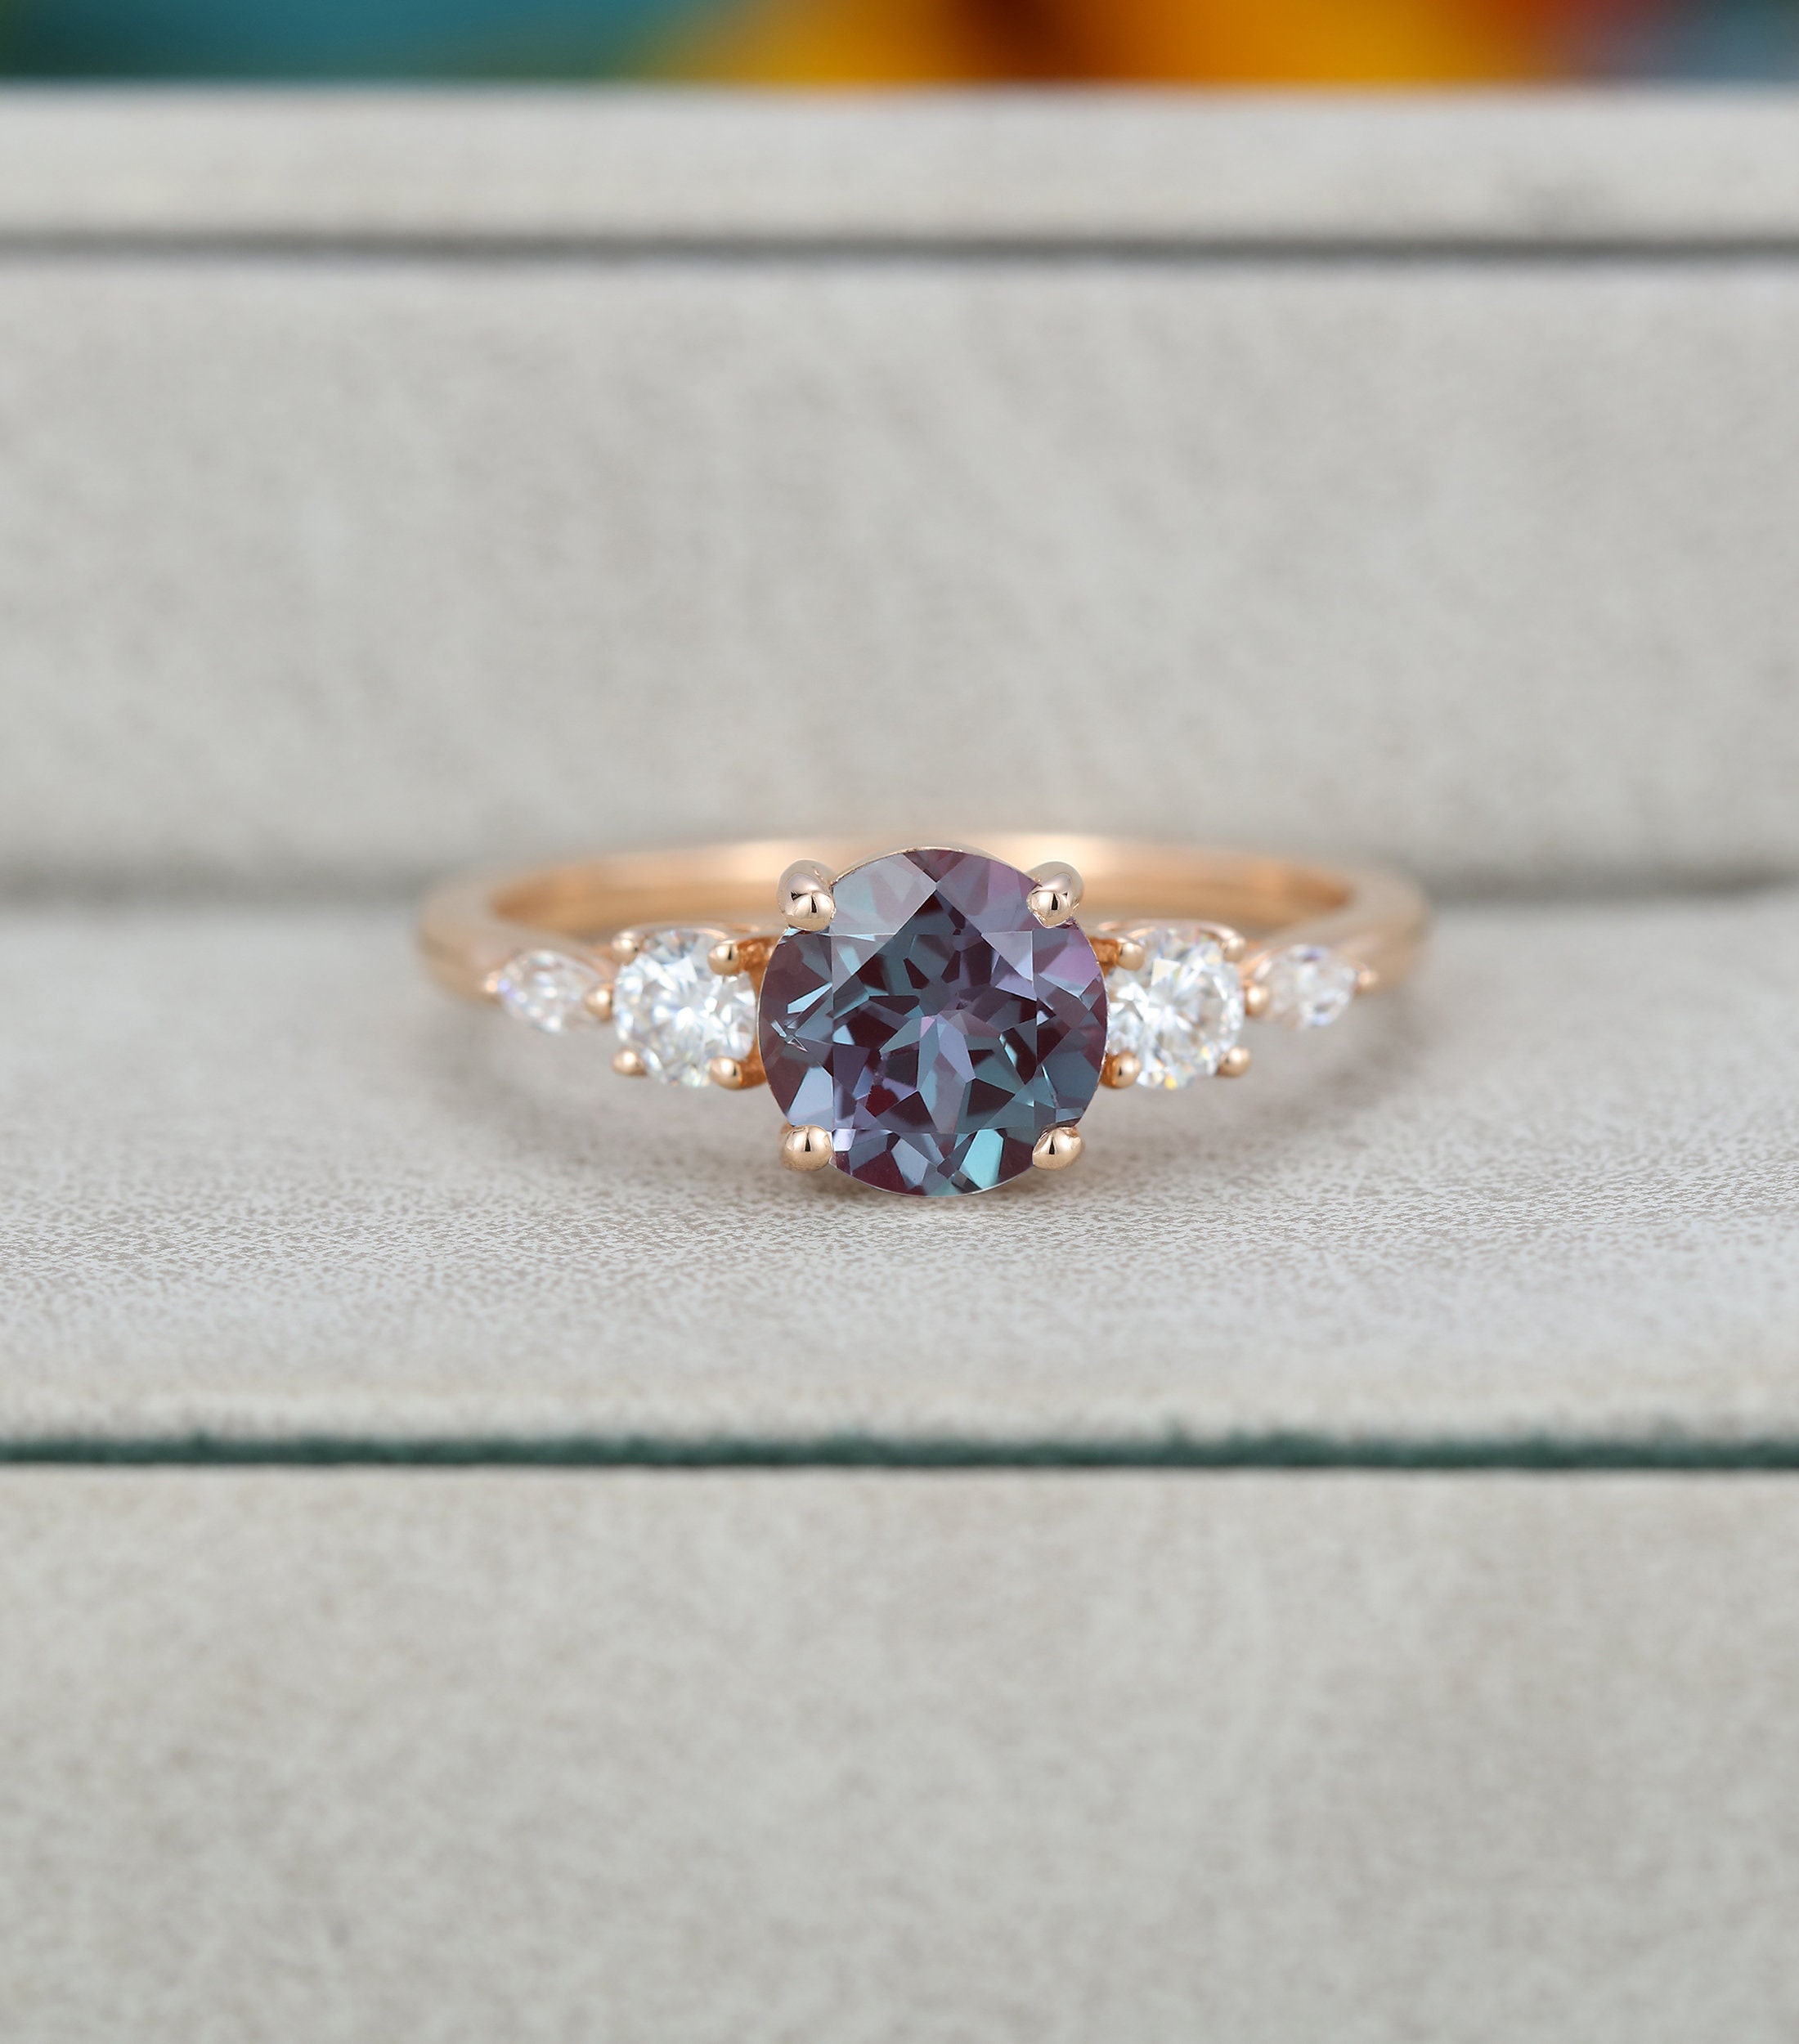 Alexandrite engagement ring Rose gold Unique engagement ring | Etsy